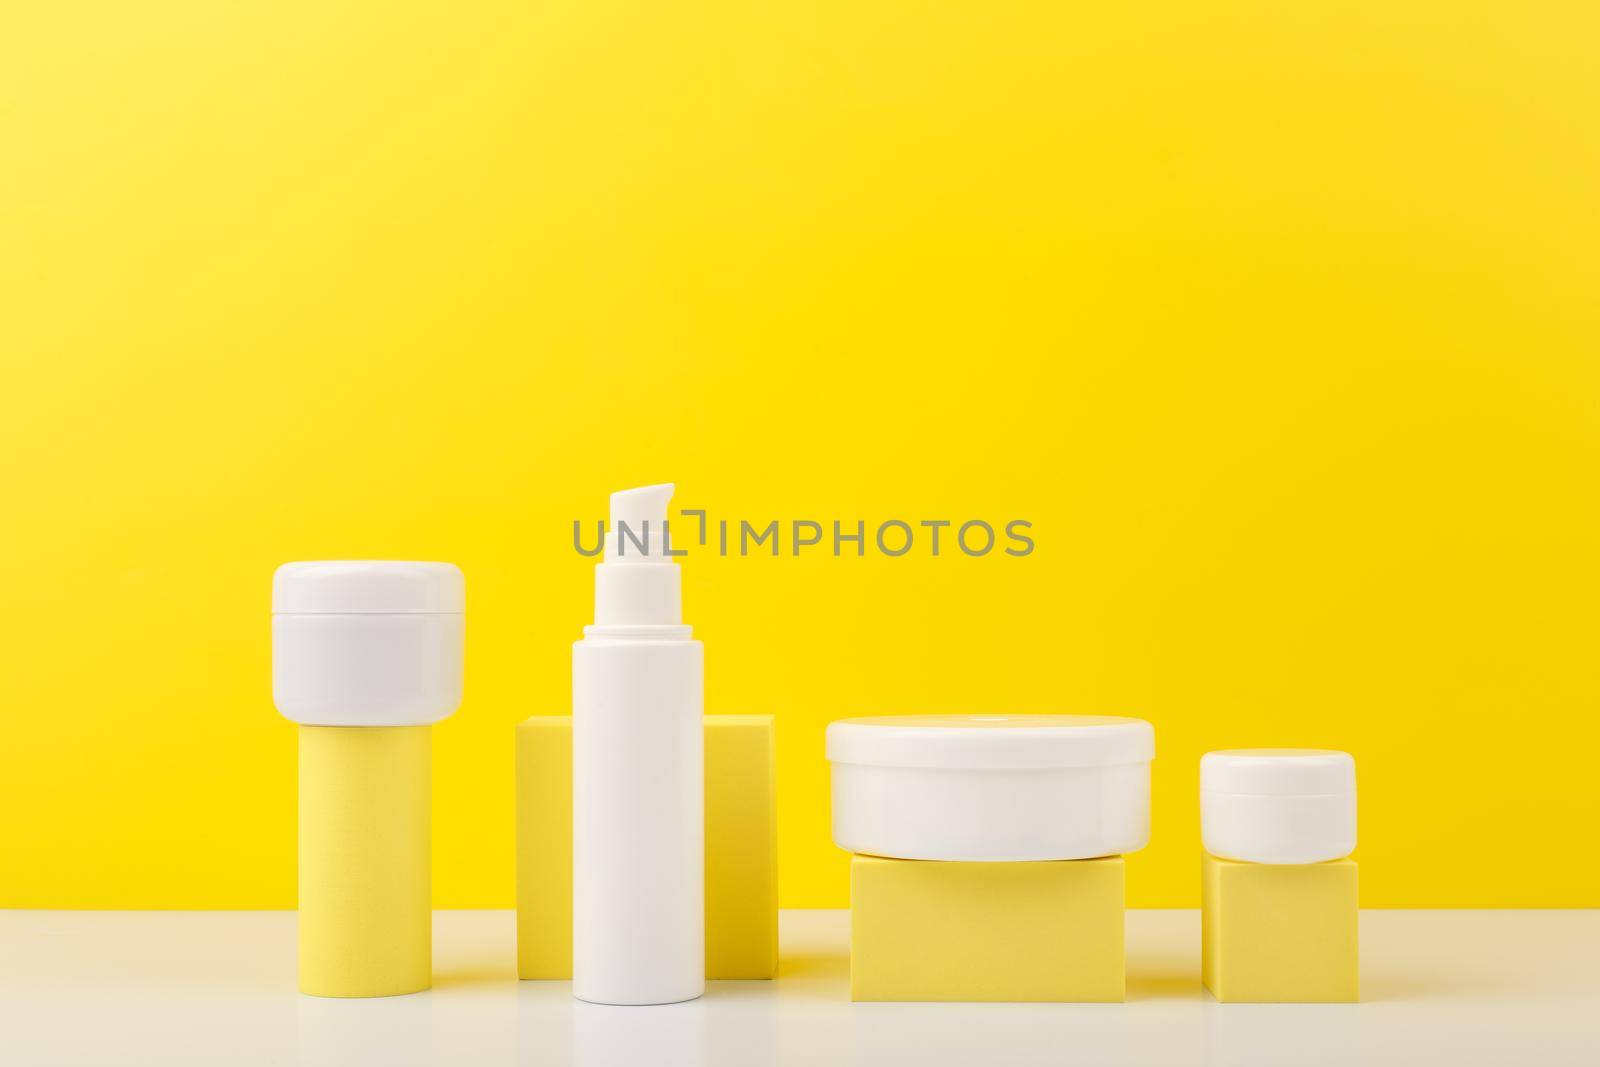 Trendy colorful composition with set of cosmetic bottles with beauty products on geometric props against yellow background with copy space. Concept of creams with citrus extracts or skin products with sunblock